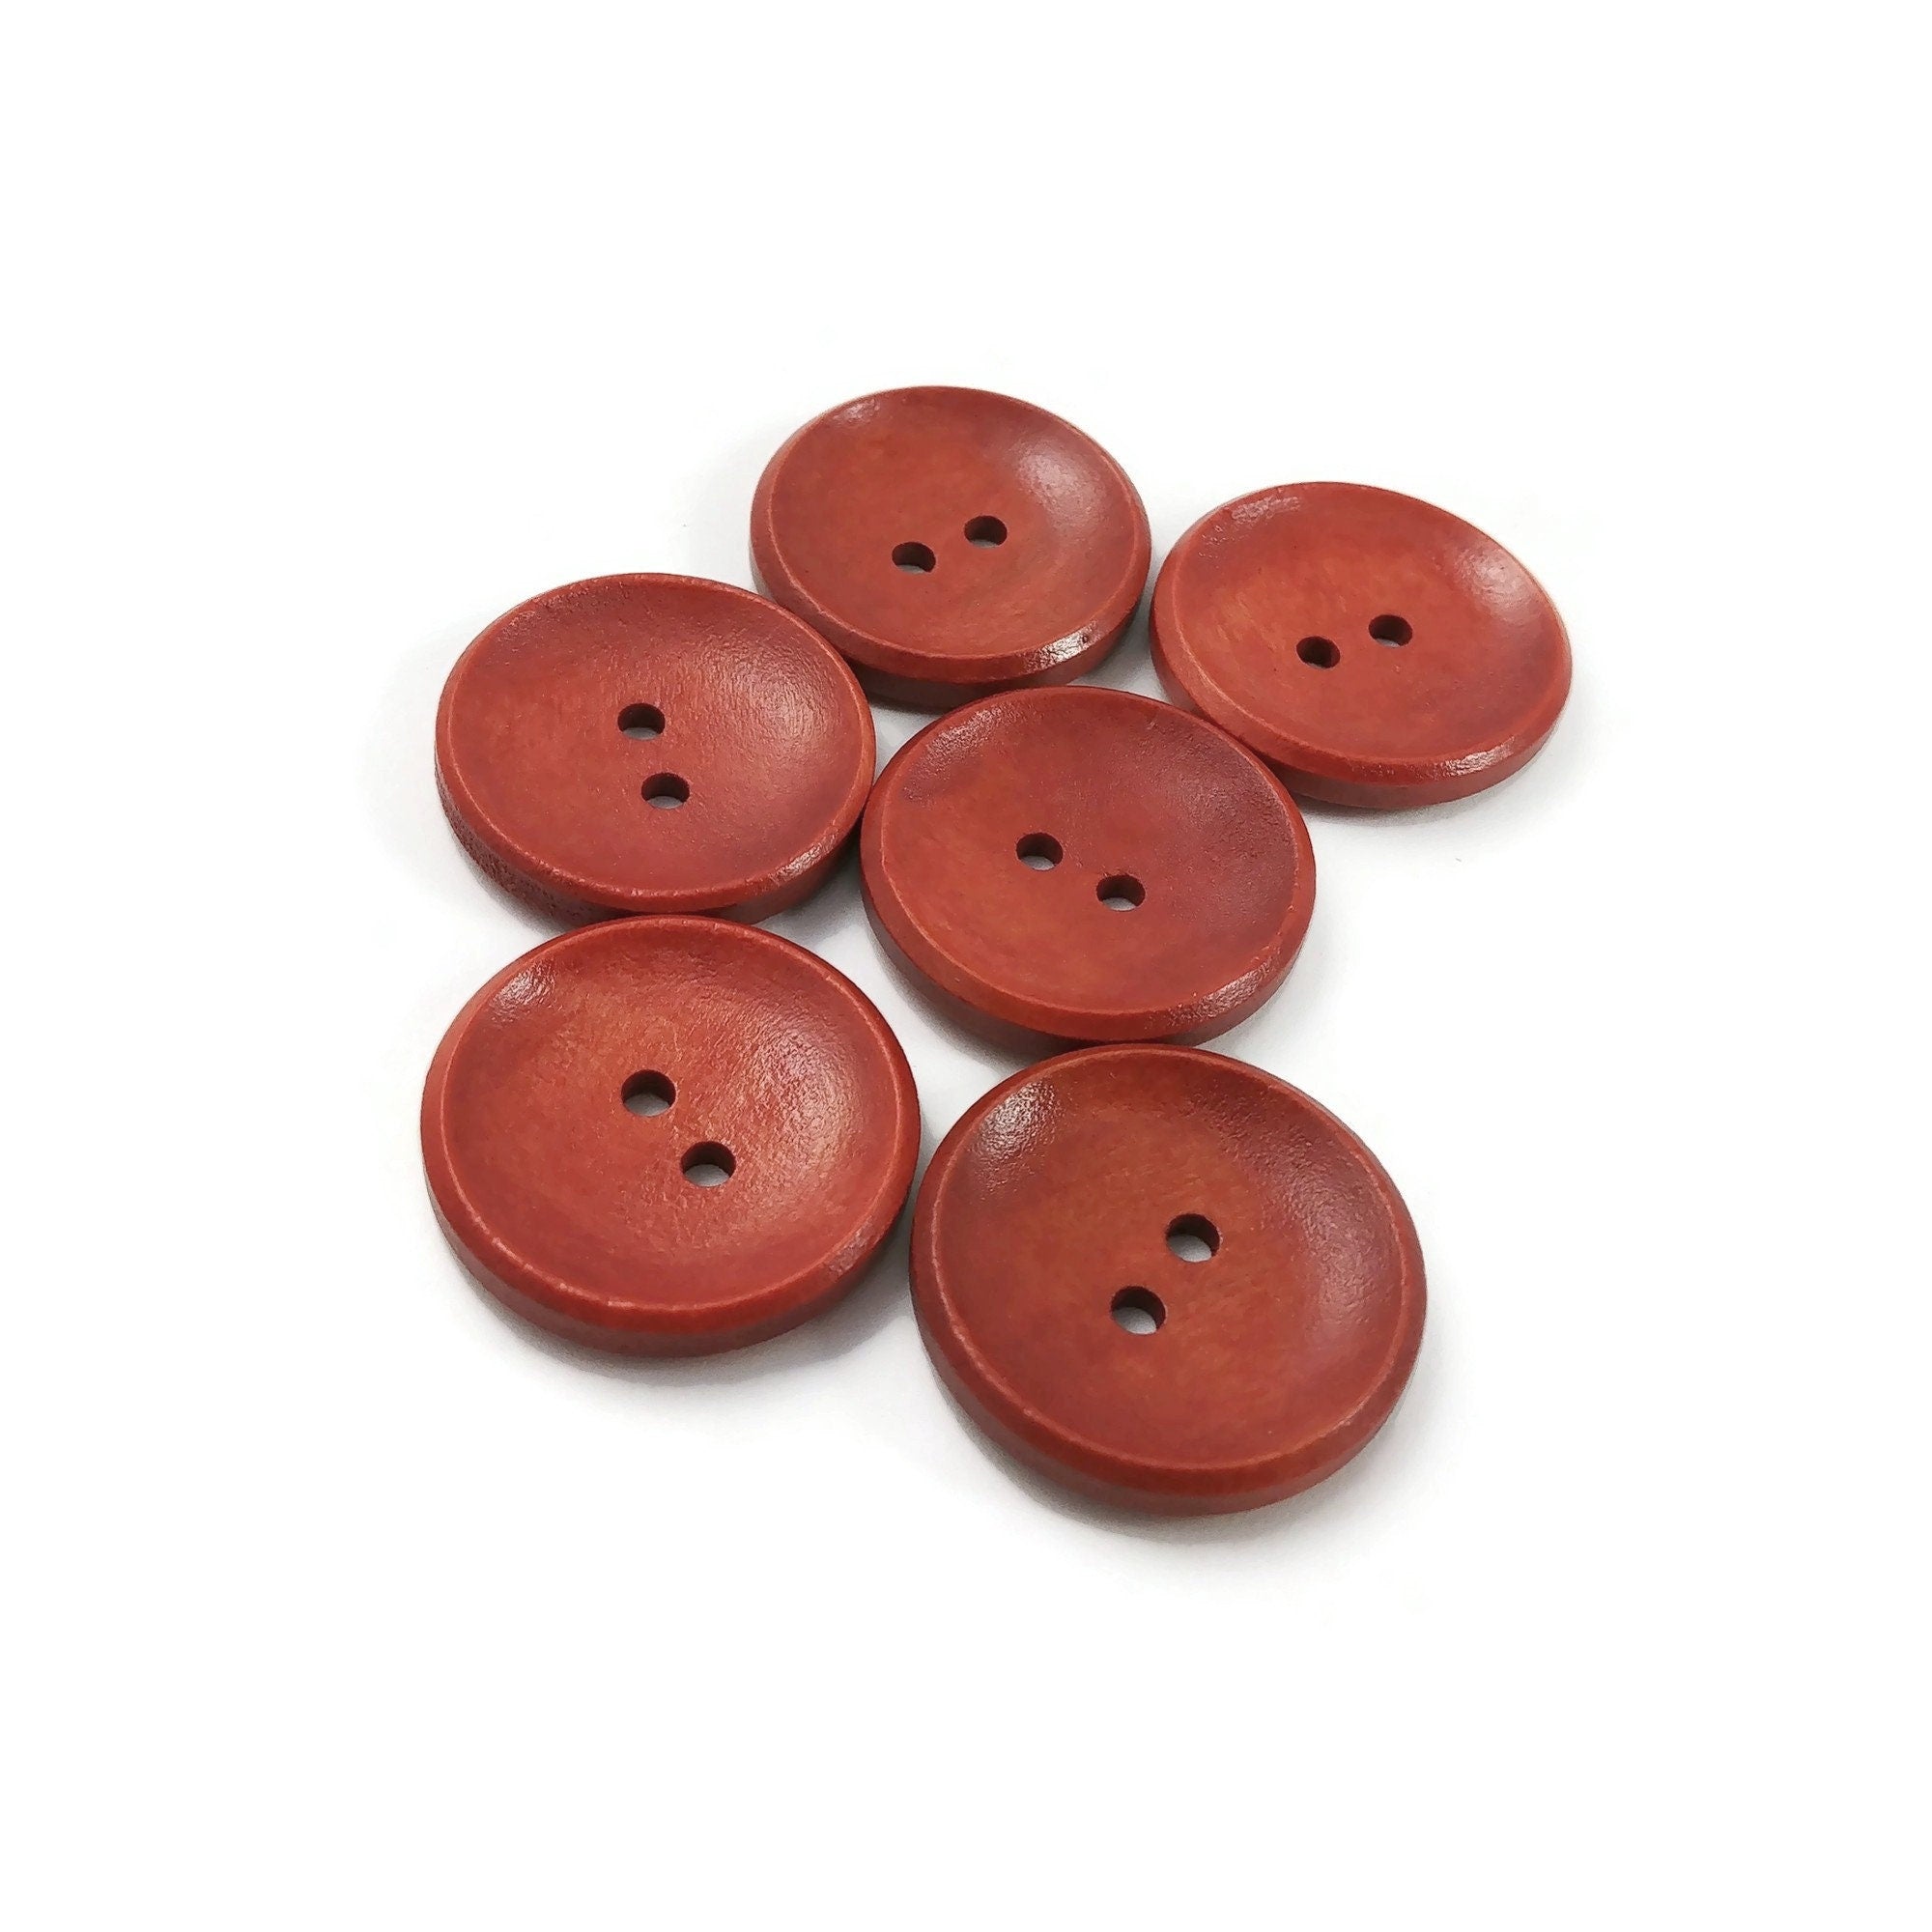 Buttons for Sewing, 100pcs 1 inch Buttons Large Wood Buttons for